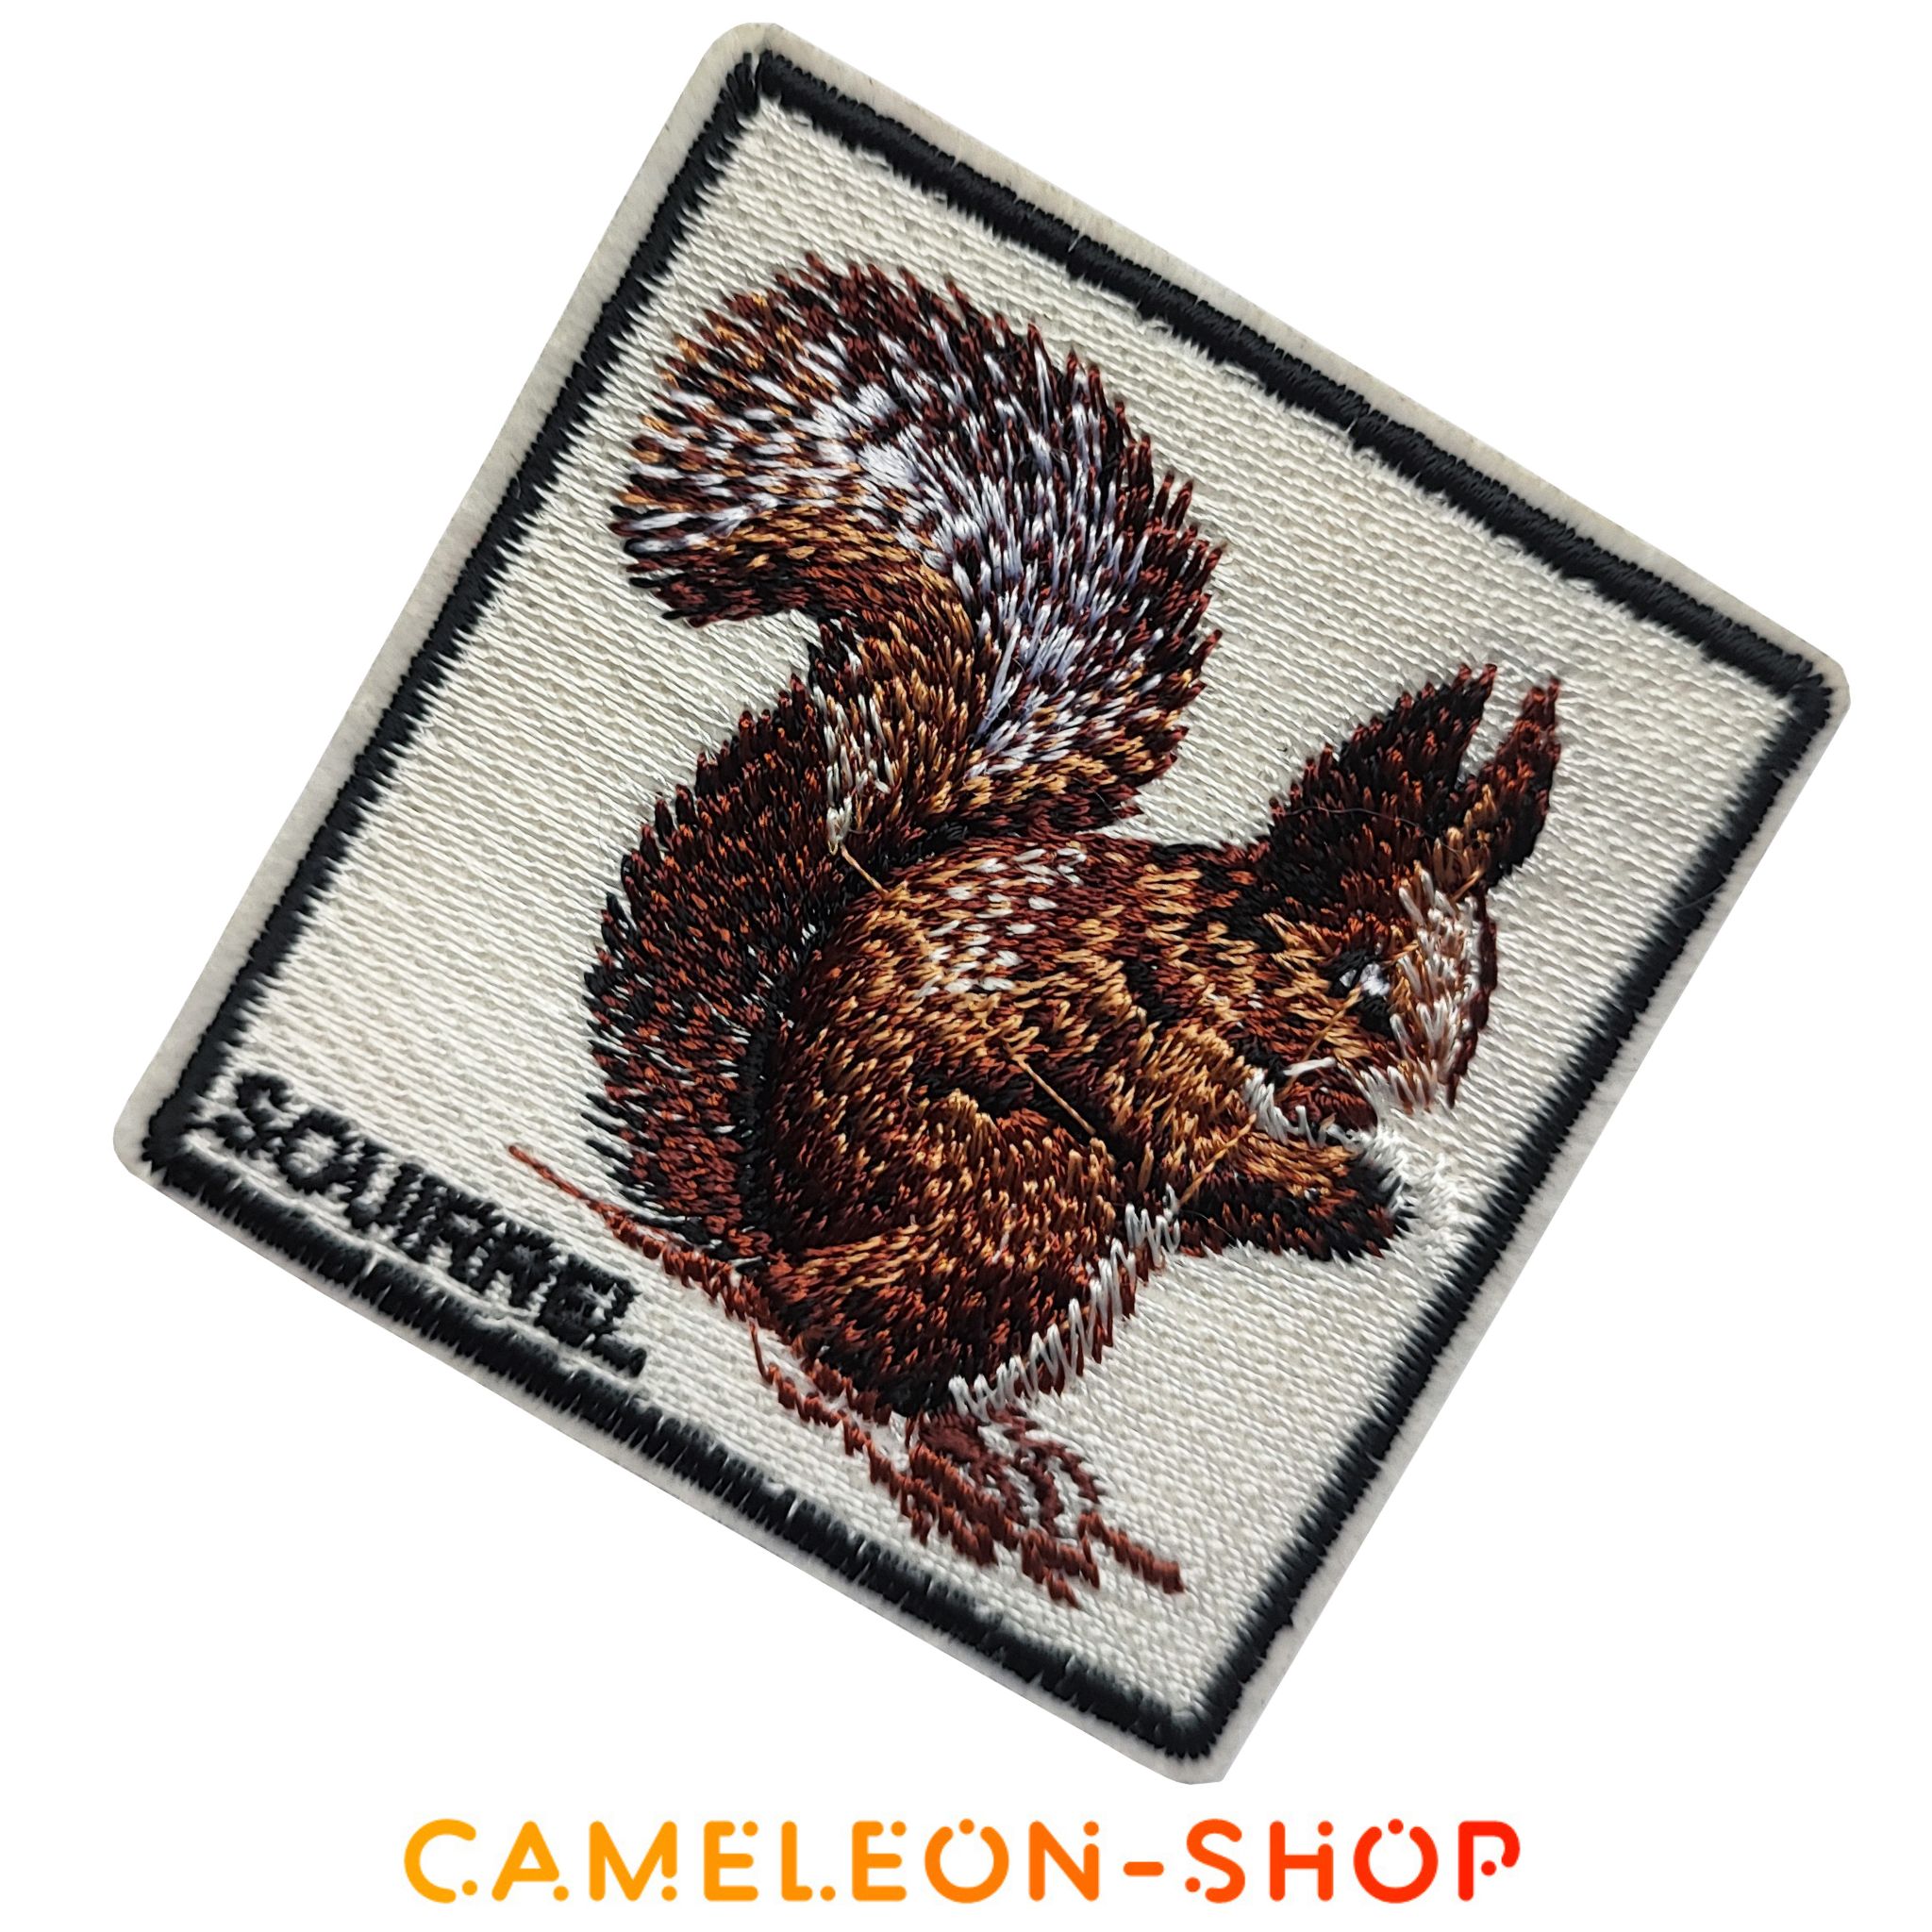 PAT1284 - Patch thermocollant animal ecureuil thermocollant 4